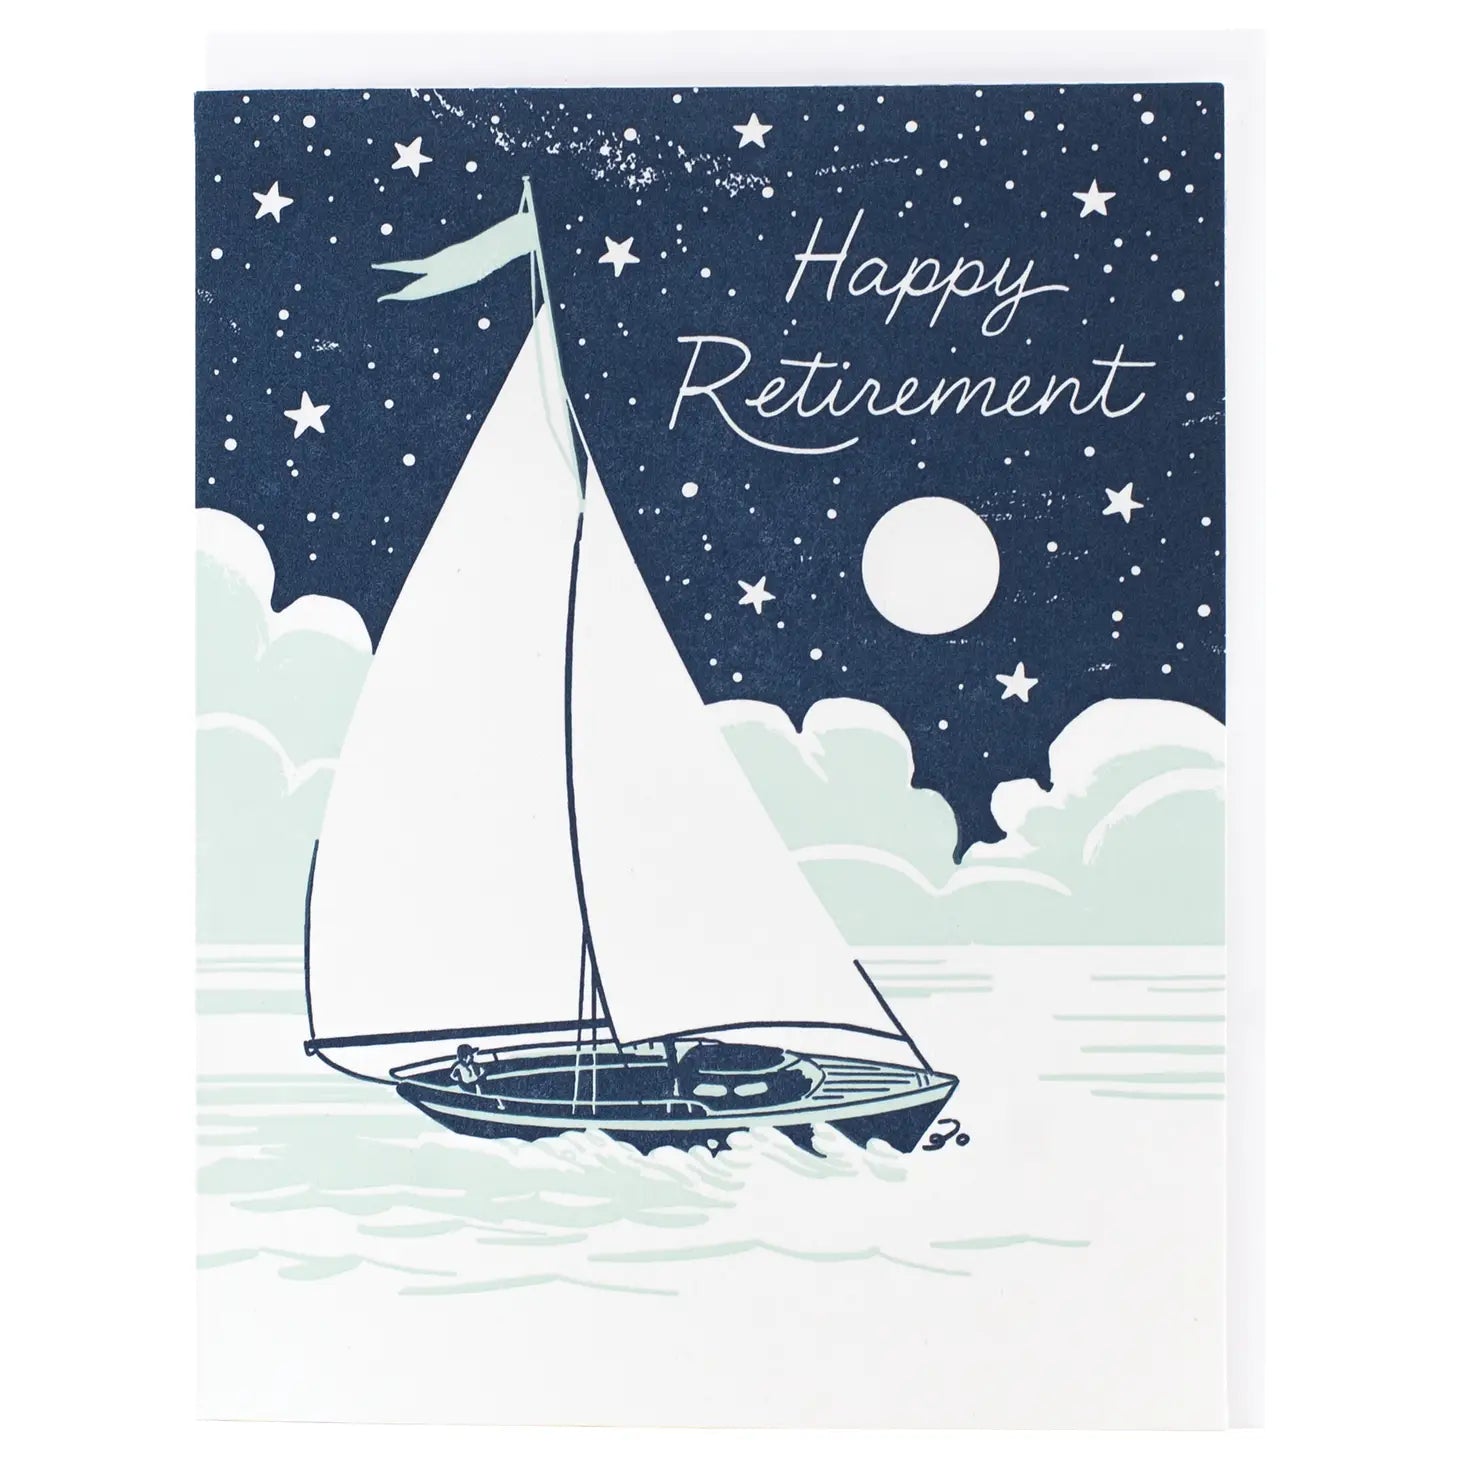 Smudge Ink Greeting Card - Nighttime Sailboat Retirement